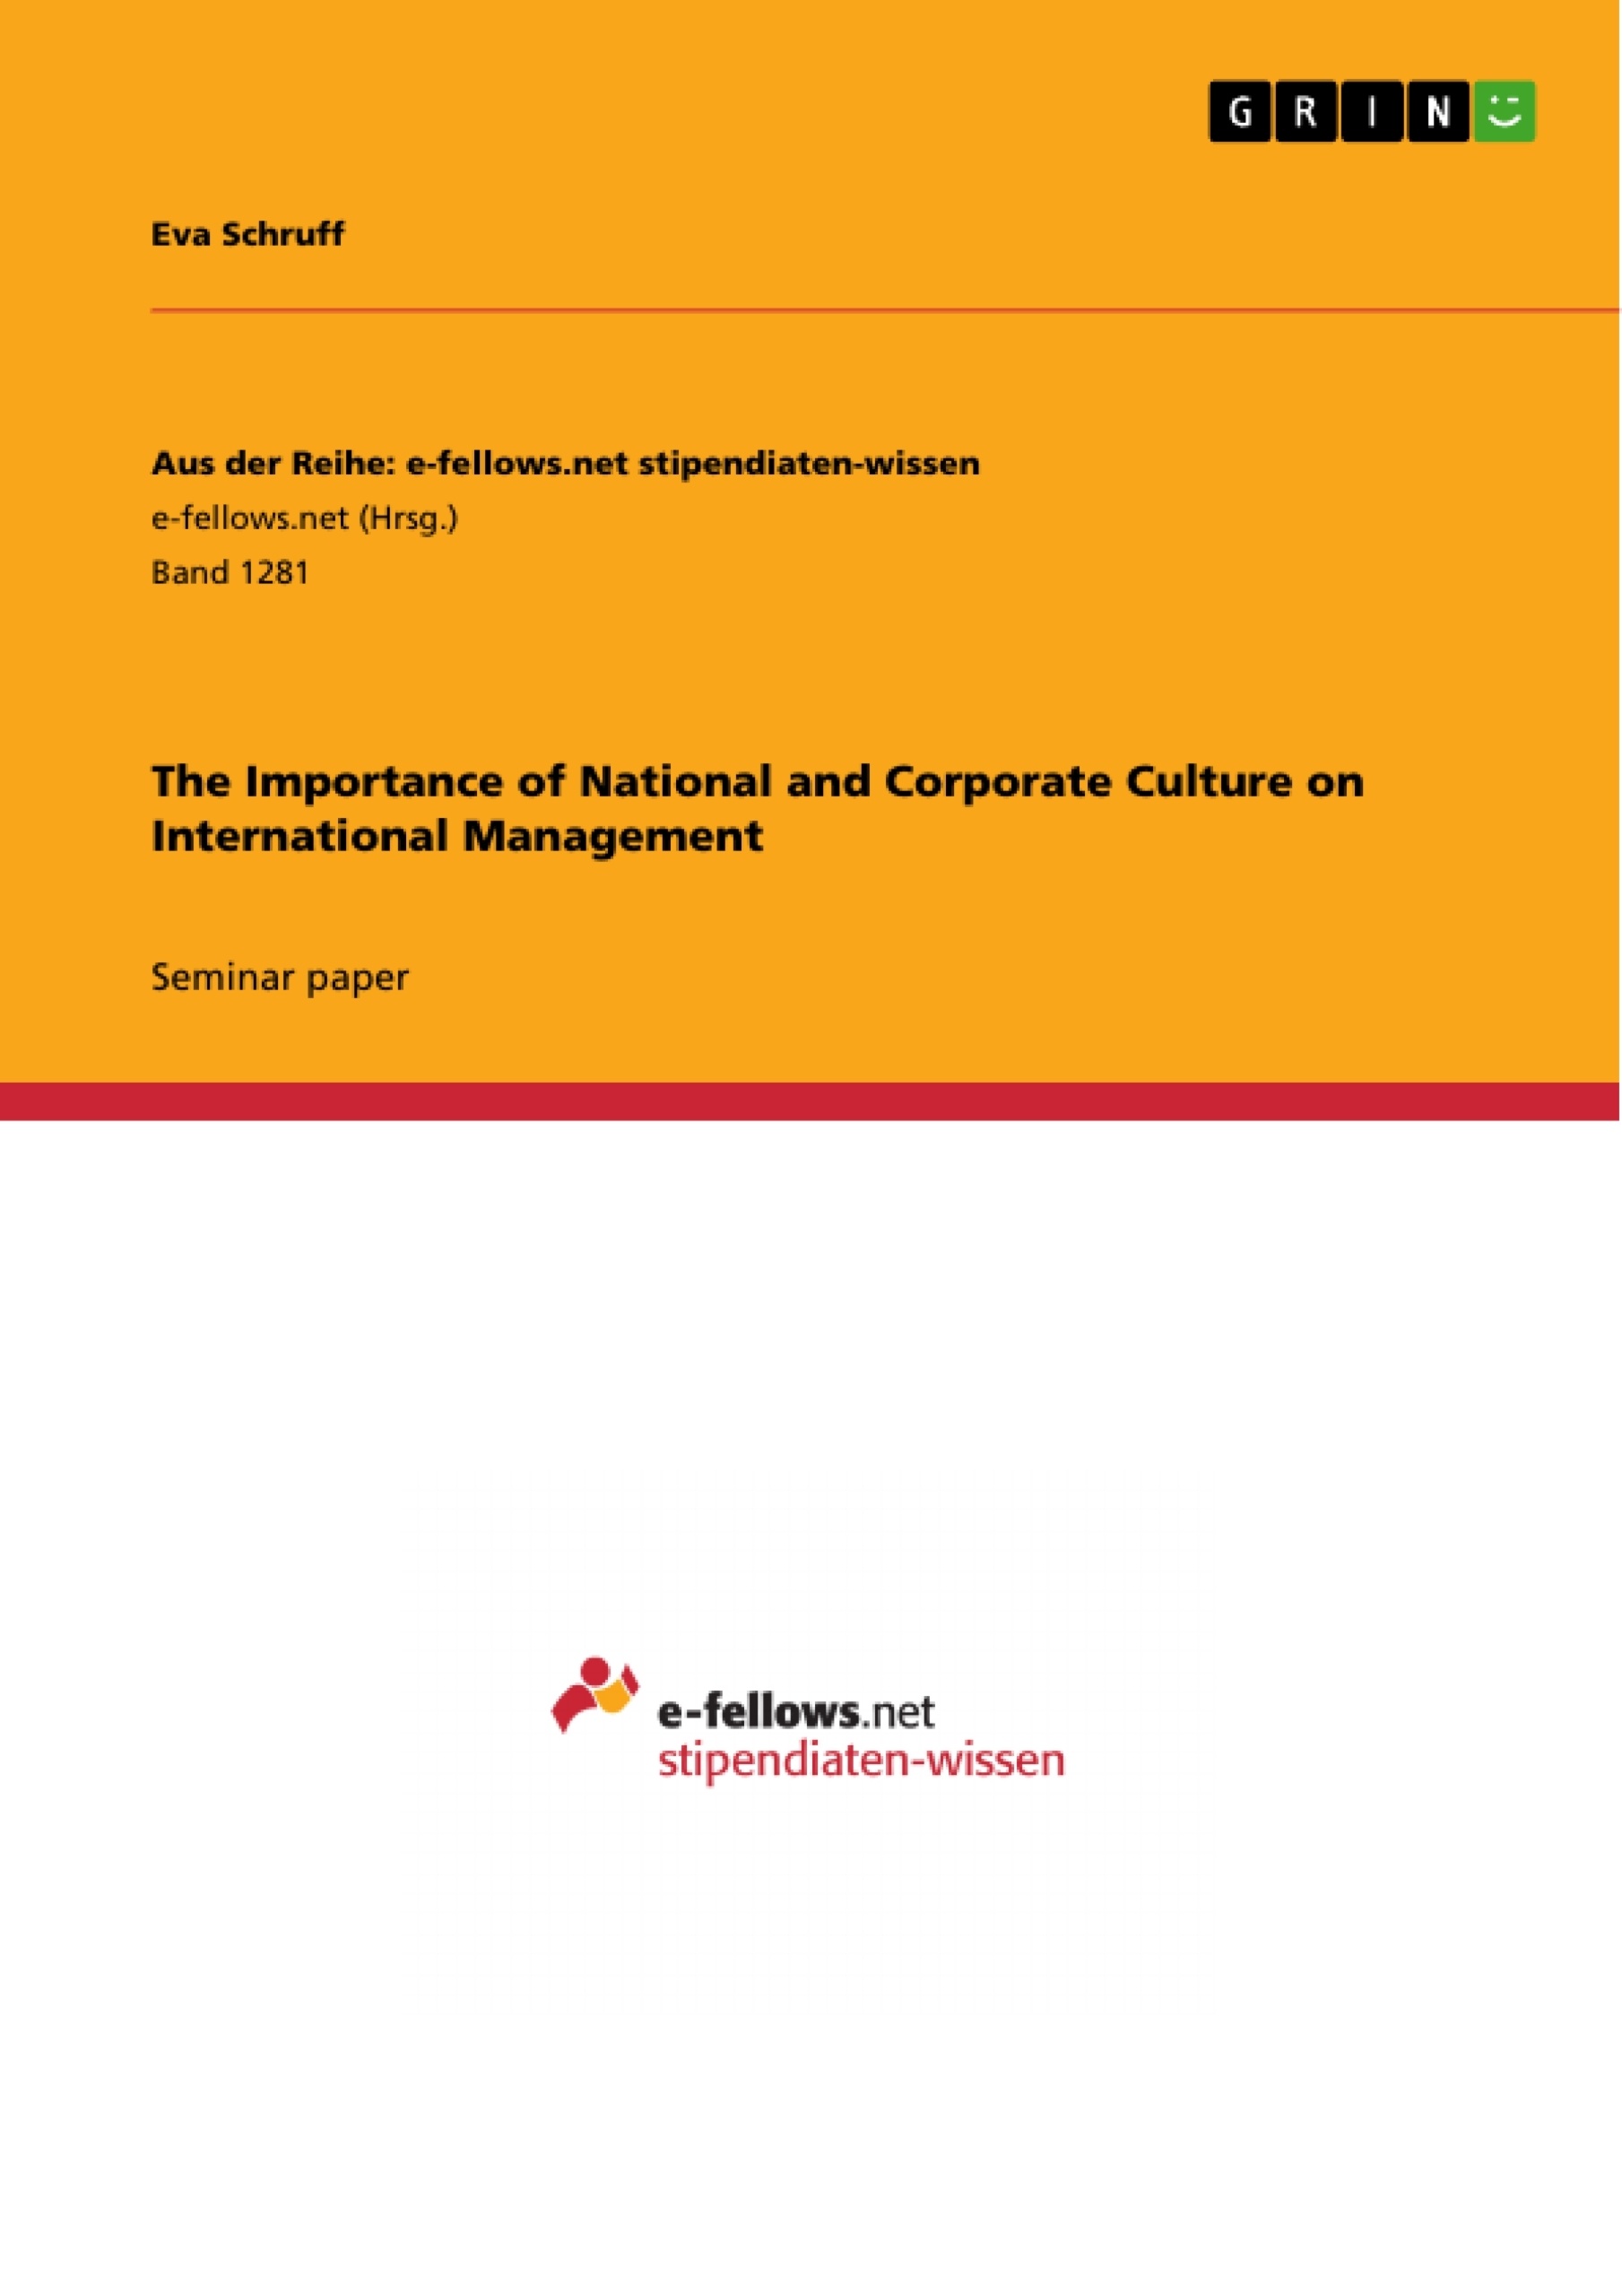 Titre: The Importance of National and Corporate Culture on International Management